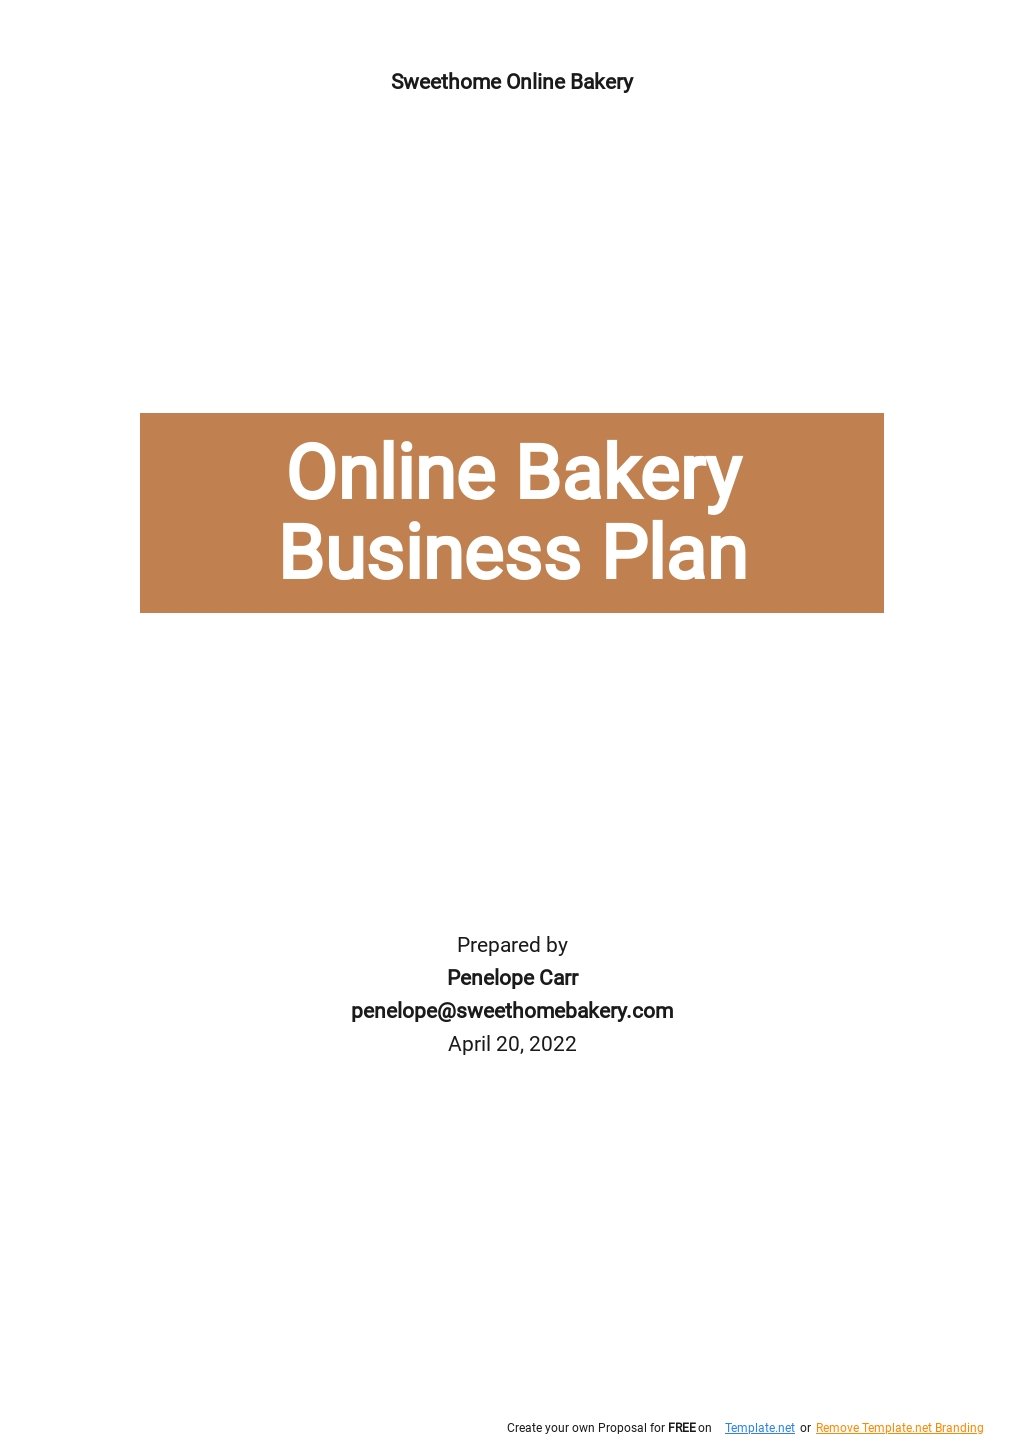 Free Online Bakery Business Plan Template